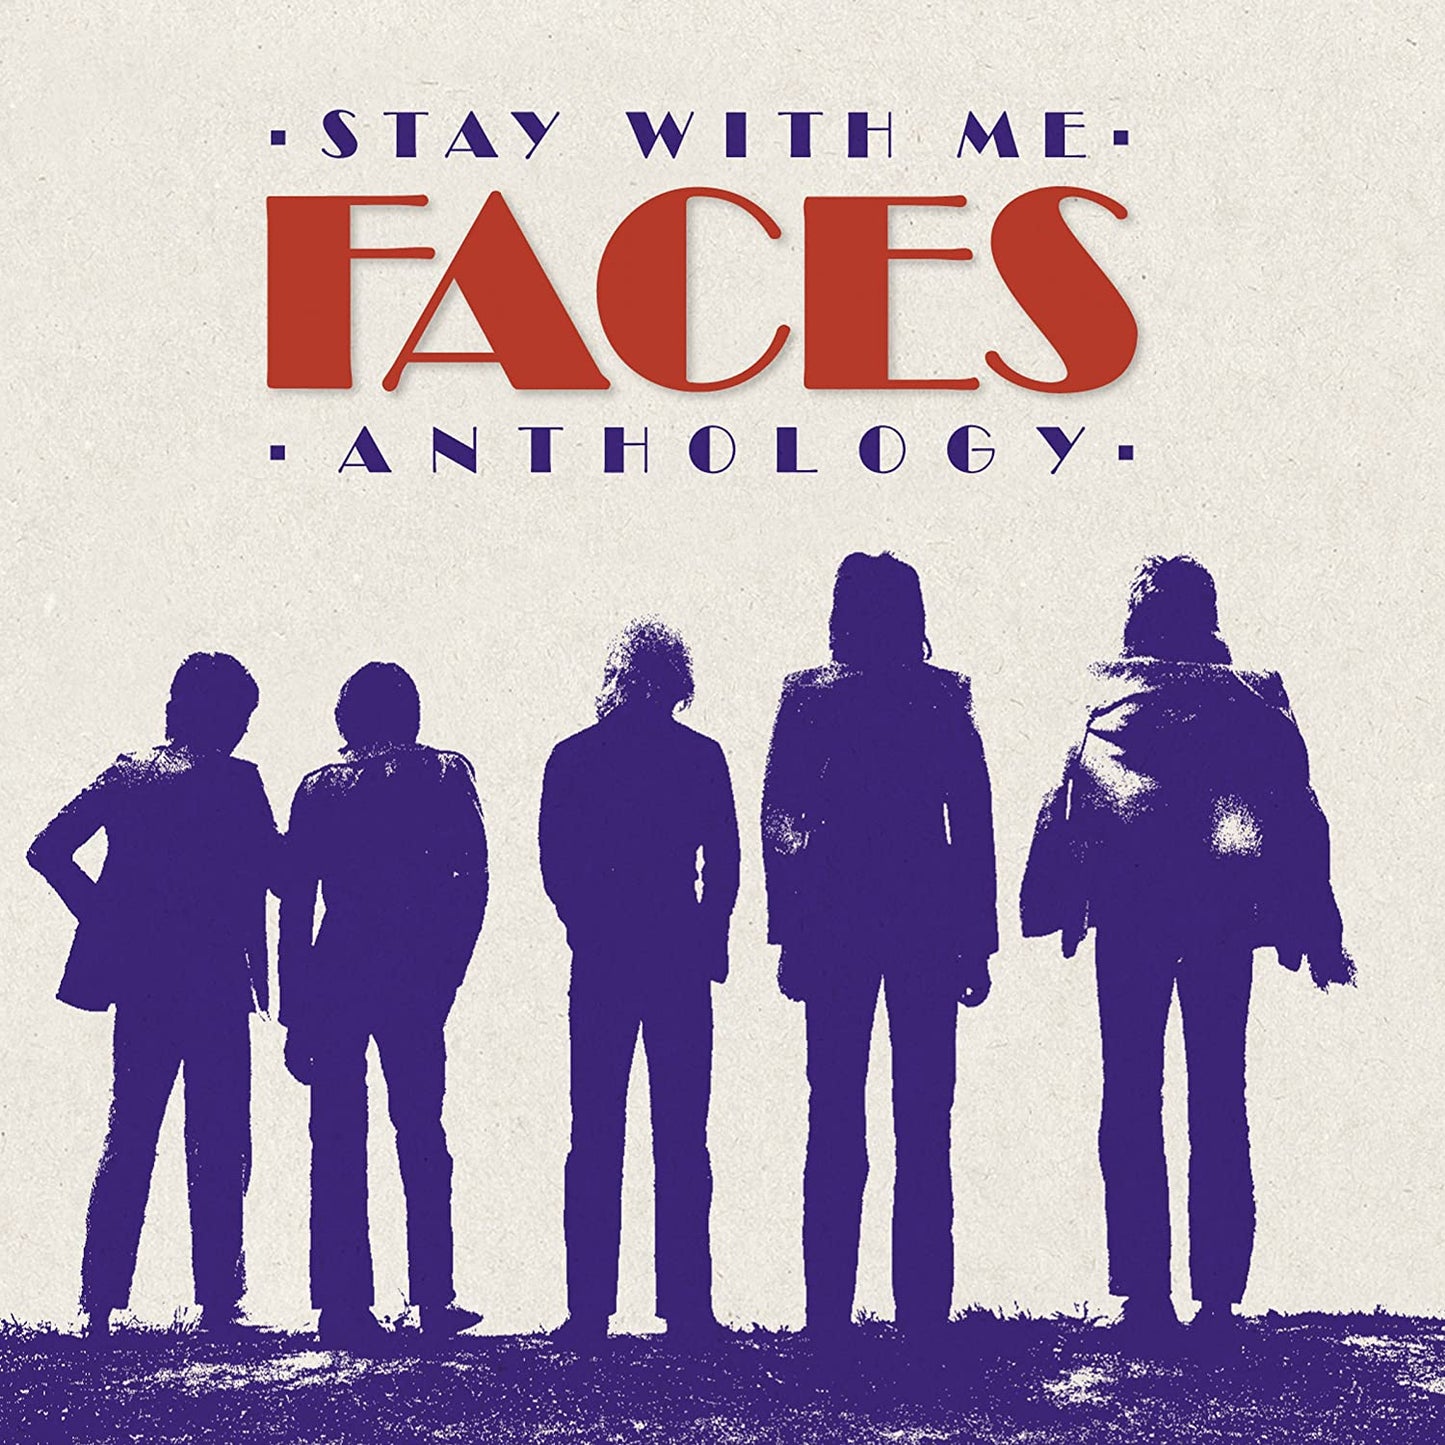 Faces - Stay With Me: The Faces Anthology - 2CD